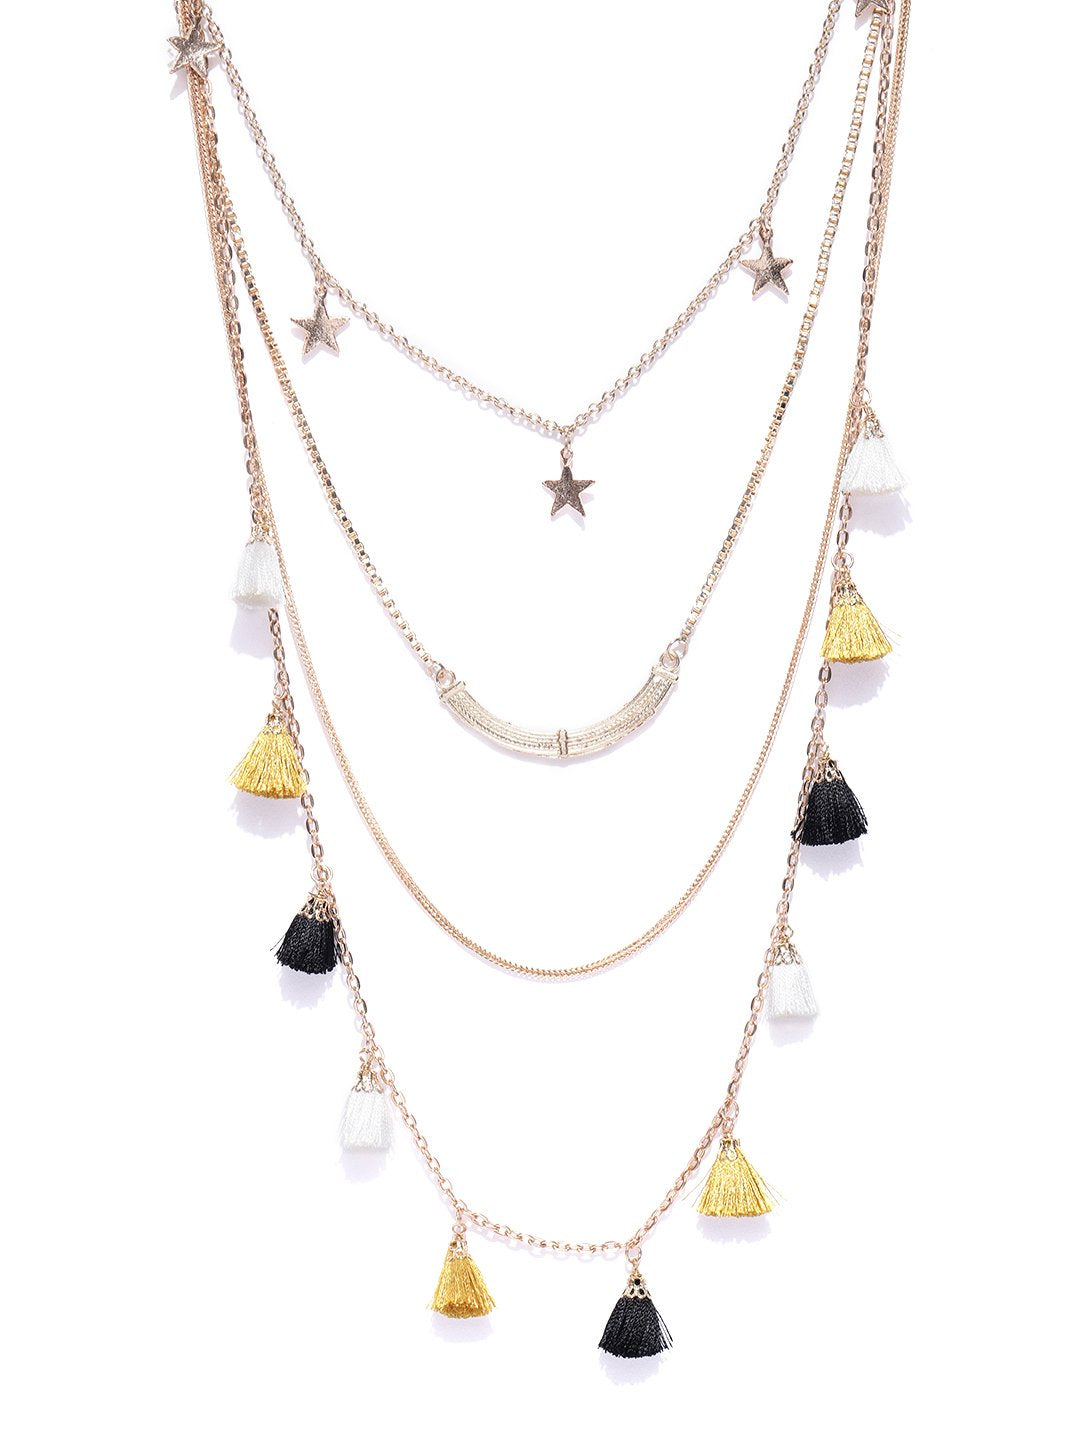 Blueberry gold layer chain necklace has tassel detailing